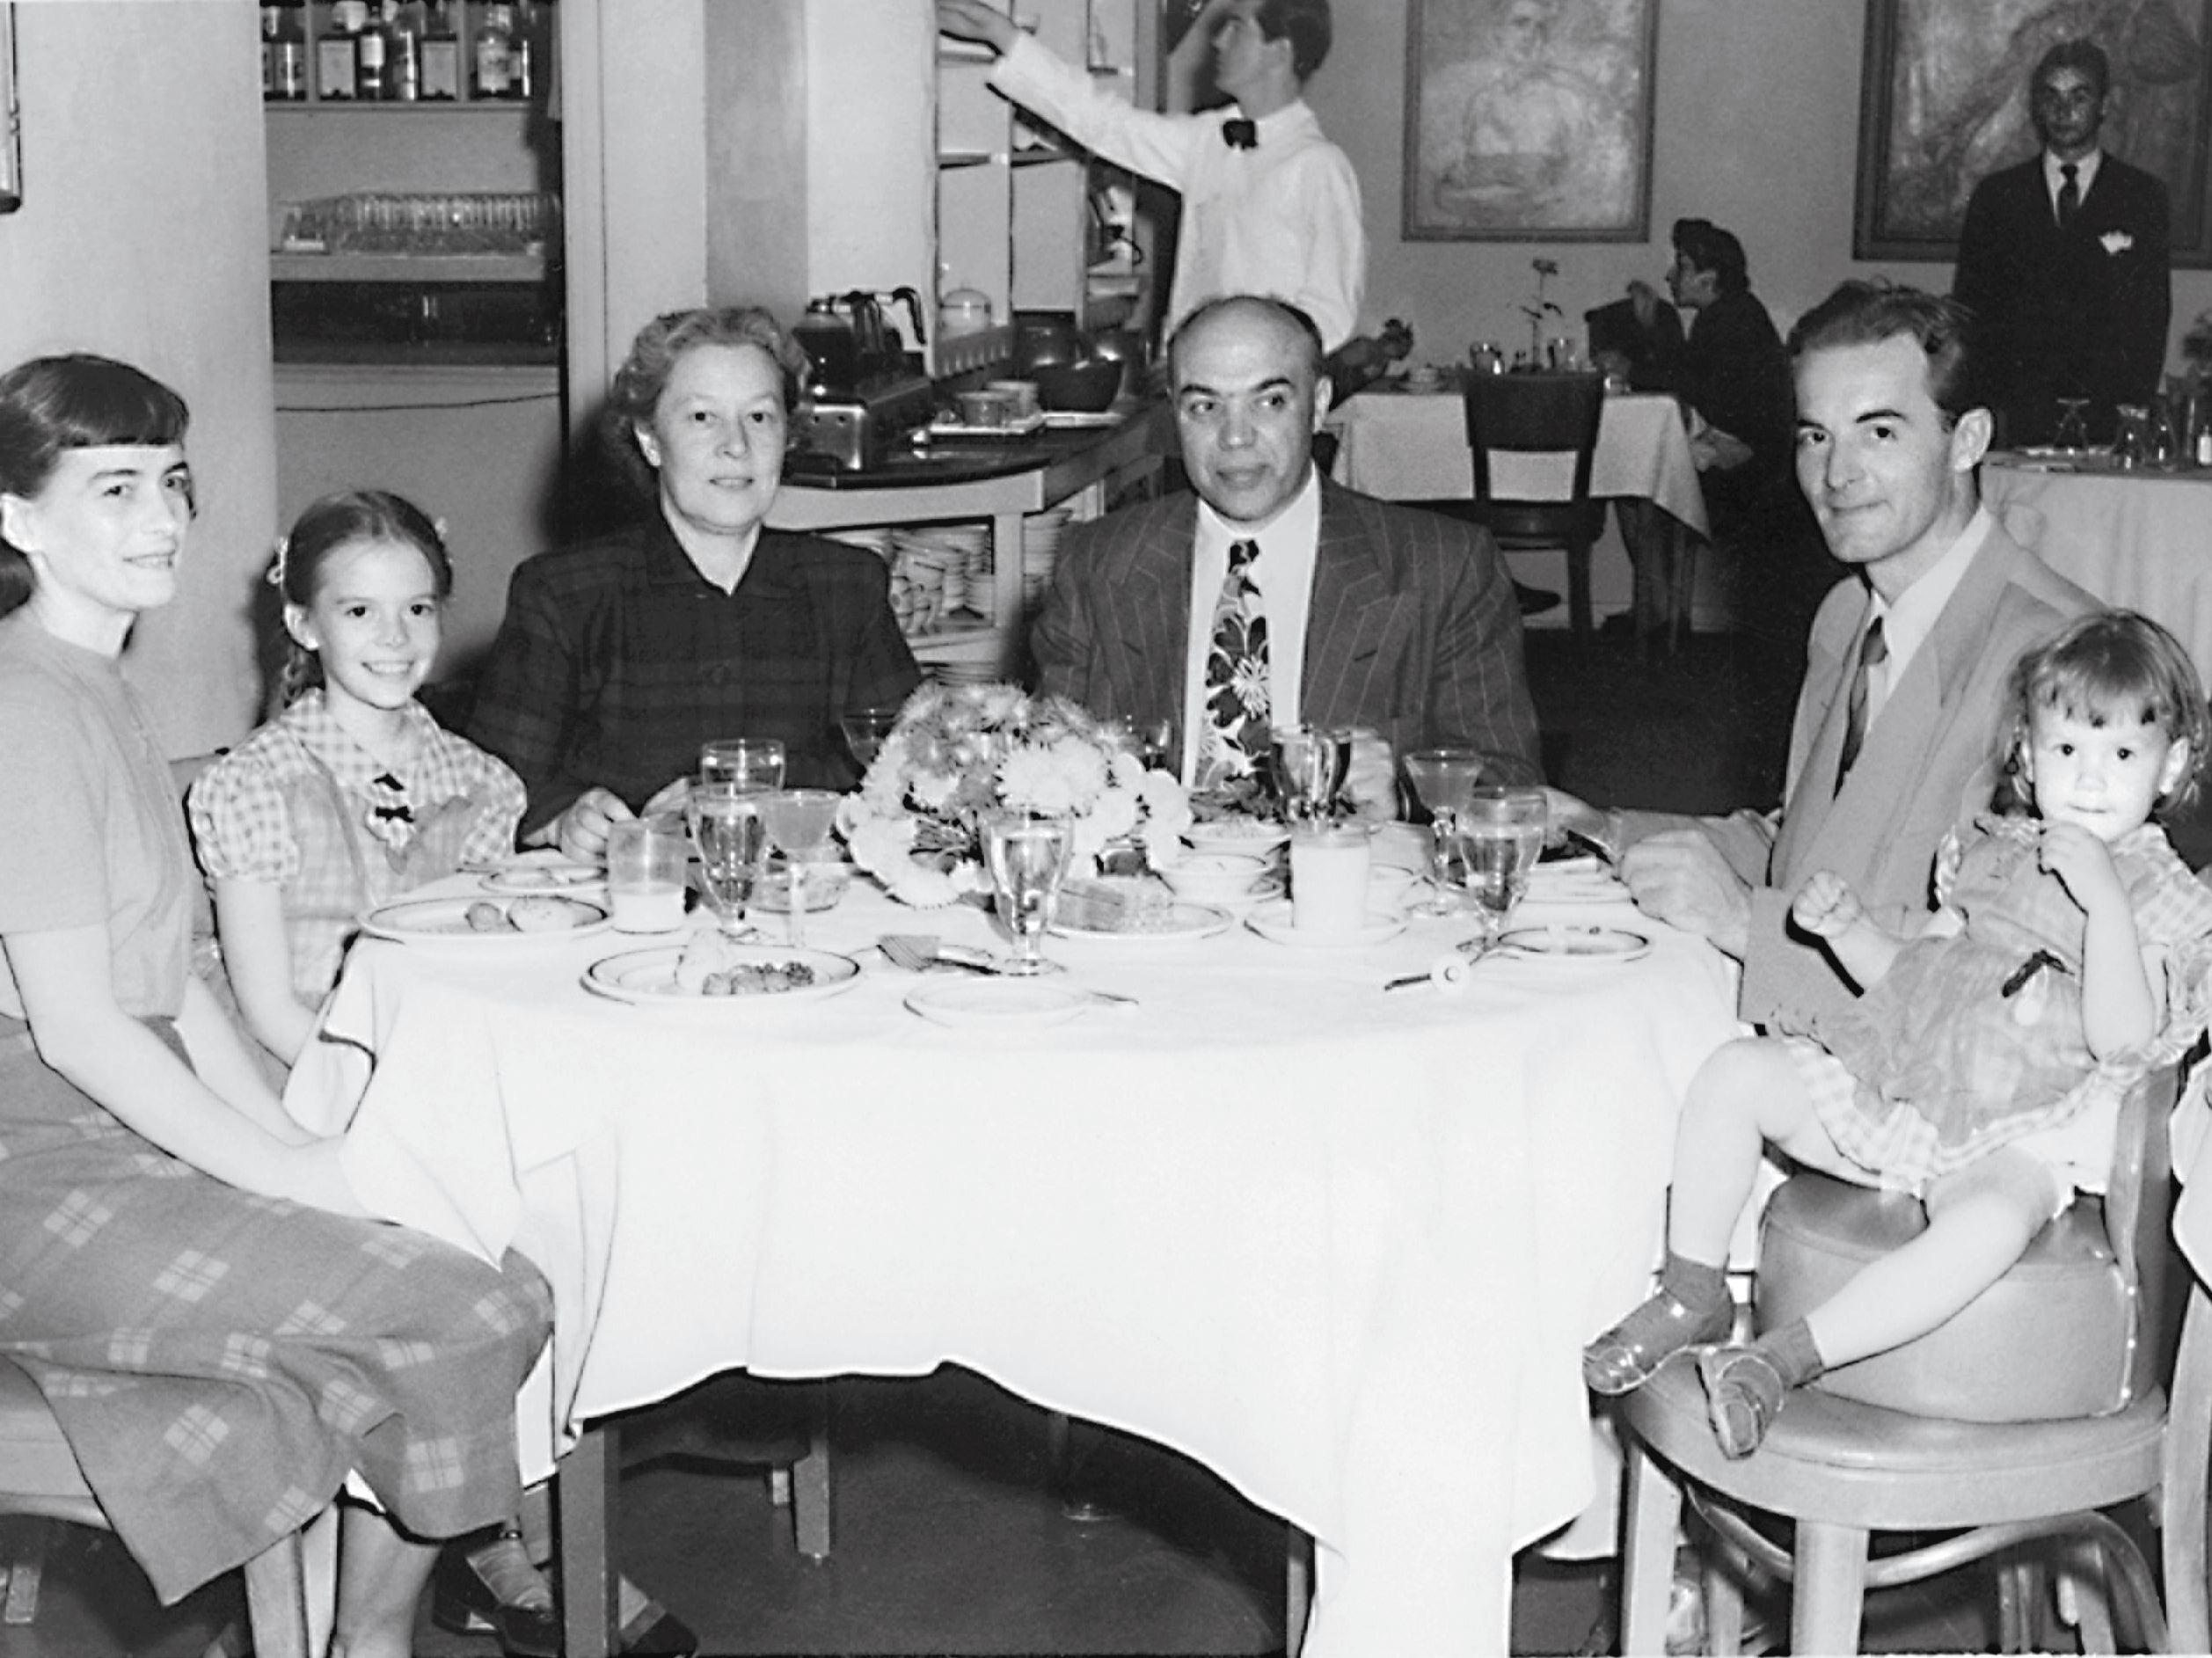 Natalie and Lana Wood’s family at a Russian restaurant. From left to right: their mother Maria Zudilova, Natalie Wood, Natalie’s godmother Helen Loy, Loy’s husband, Natalie and Lana’s father Nicholas Zacharenko, and Lana Wood